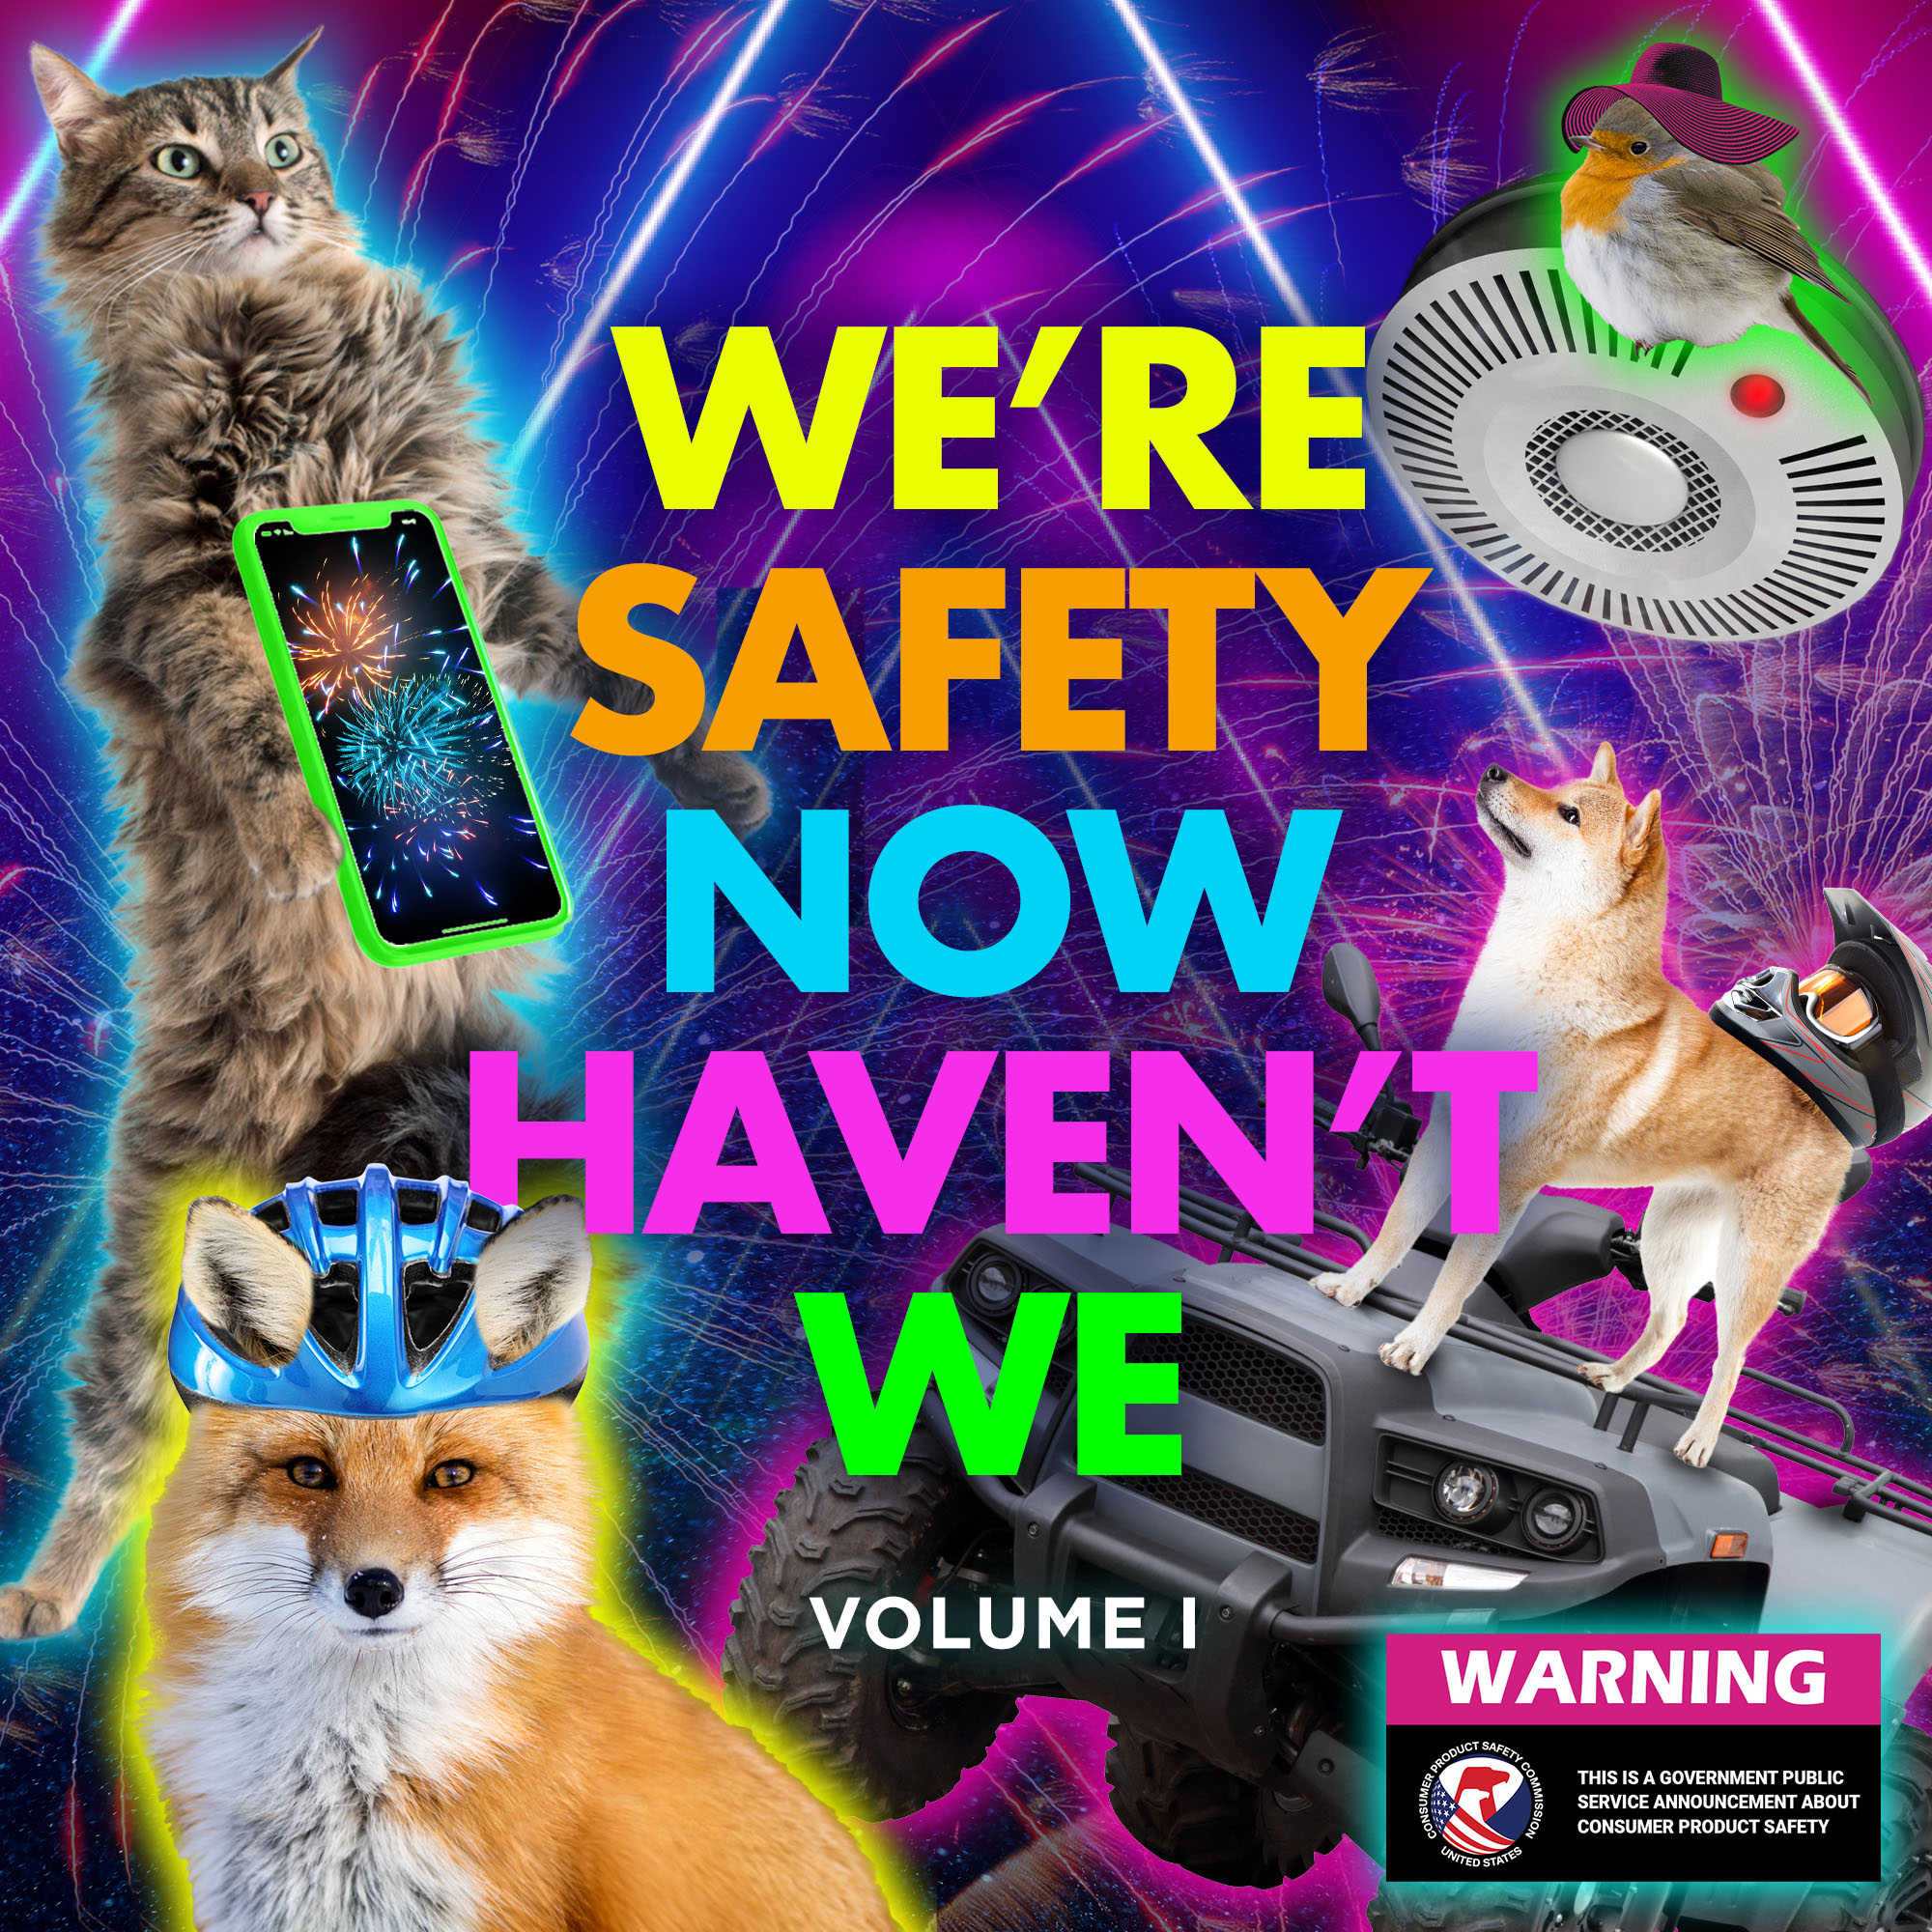 album banner image We’re Safety Now Haven’t We